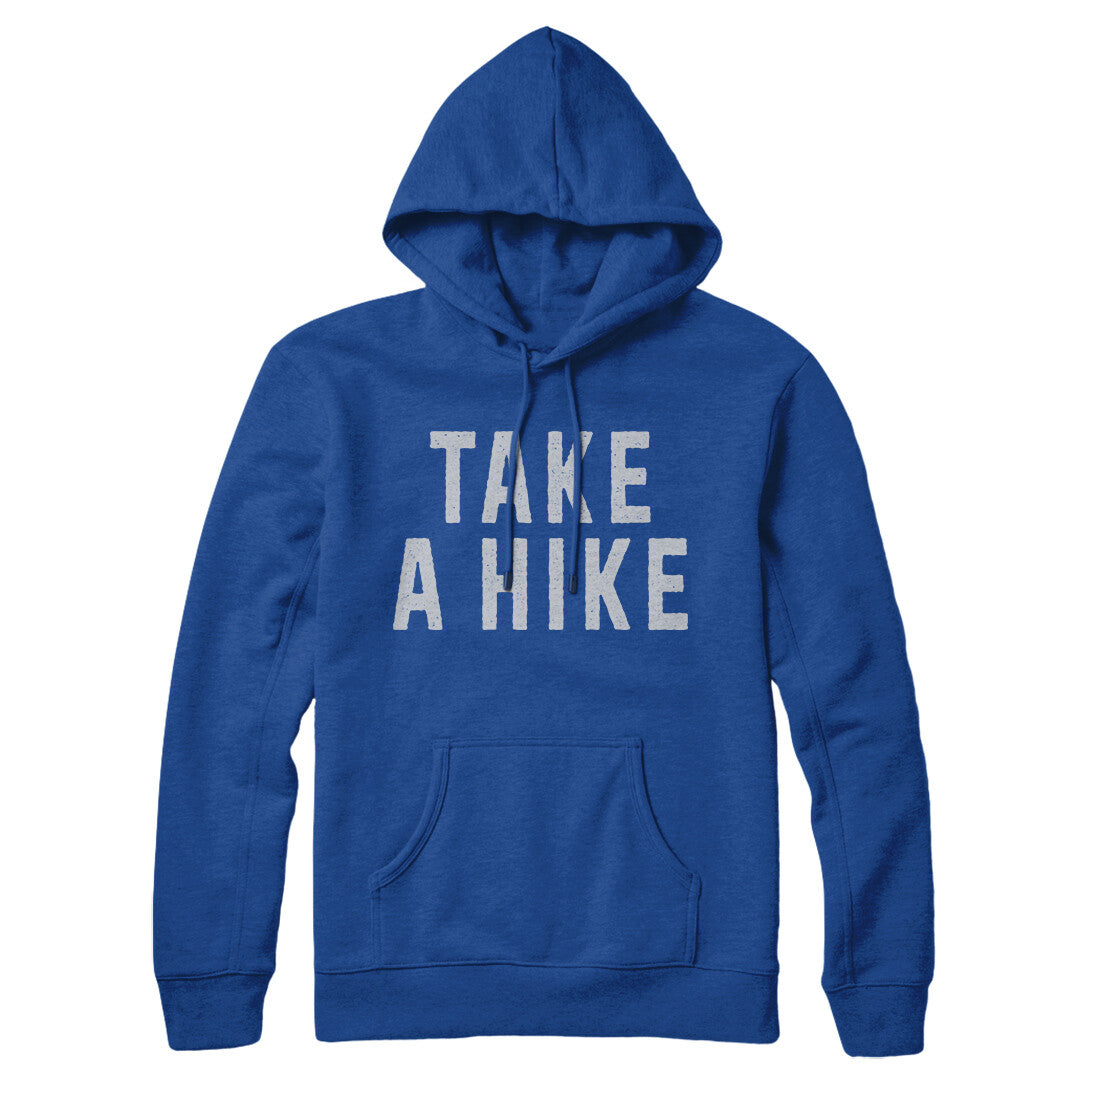 Take a Hike in True Royal Color